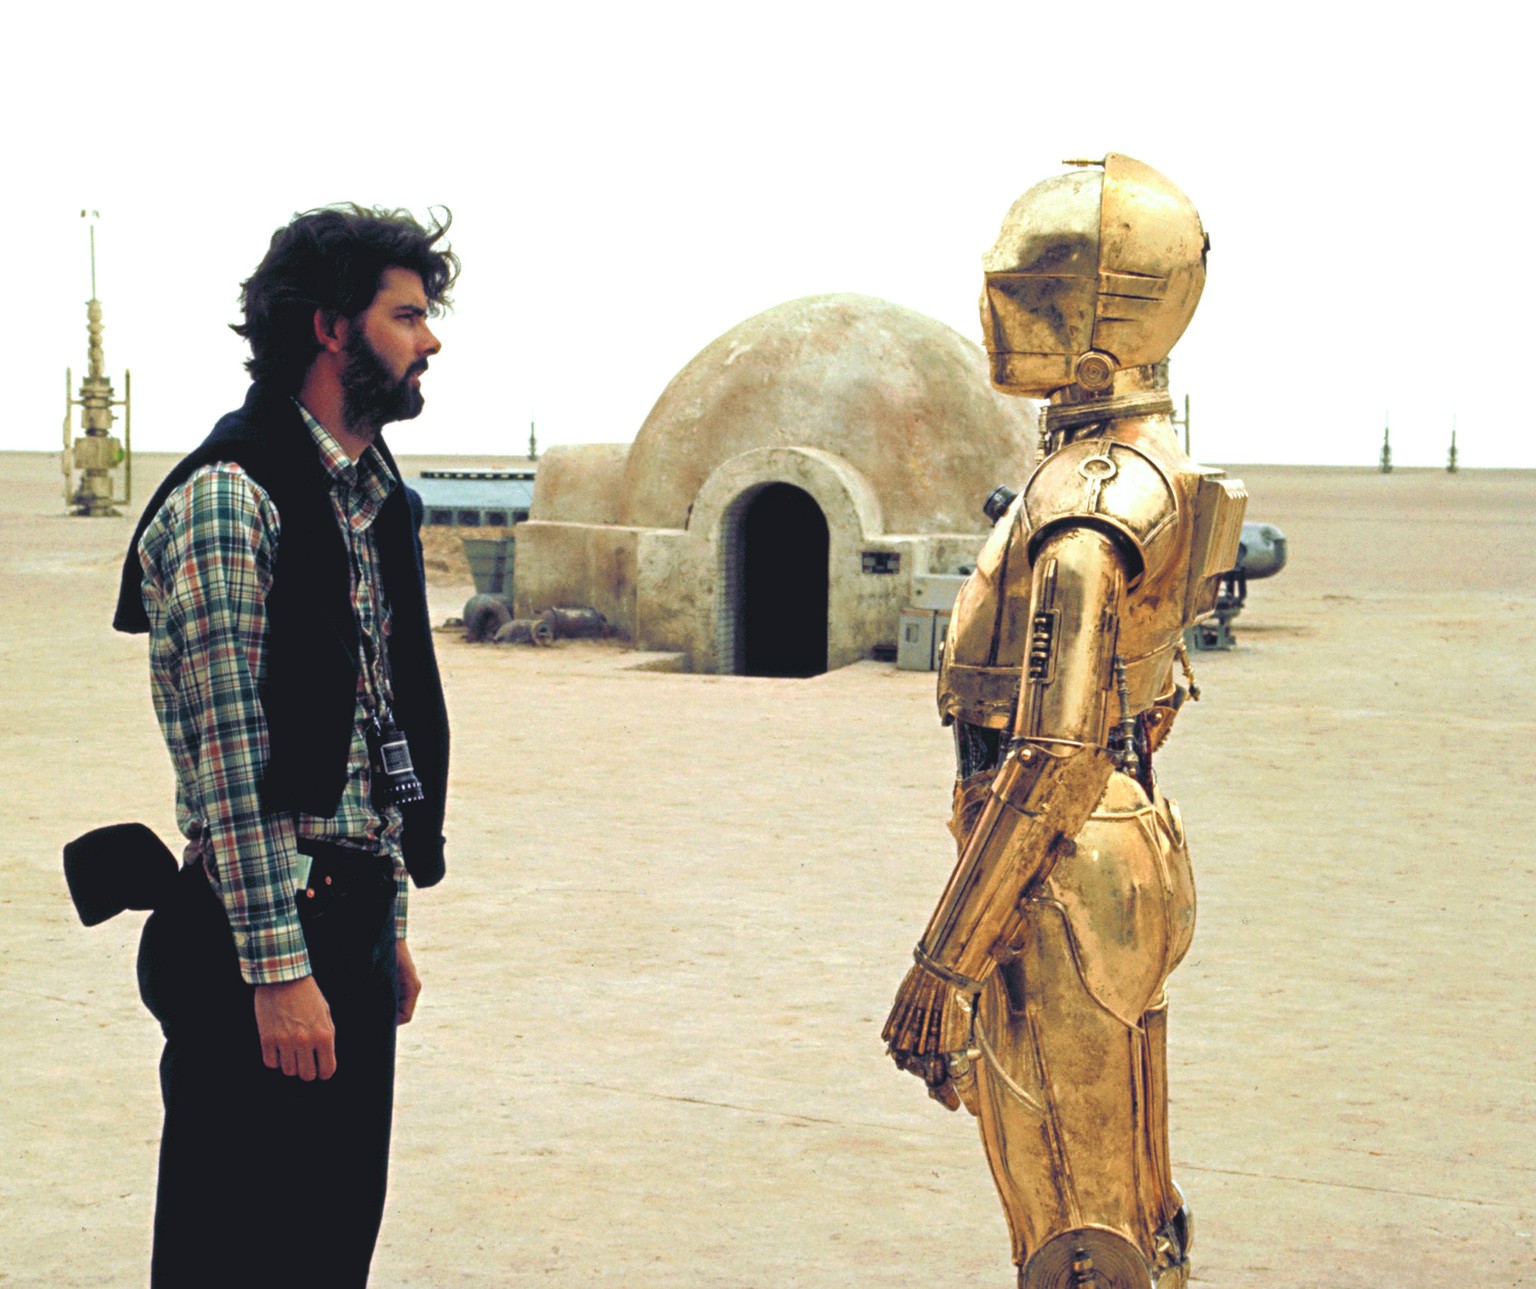 On the set of Star Wars: Episode IV - A New Hope
British actor Anthony Daniels (who plays C-3PO) with American director, screenwriter and producer George Lucas on the set of his movie Star Wars: Episo ...